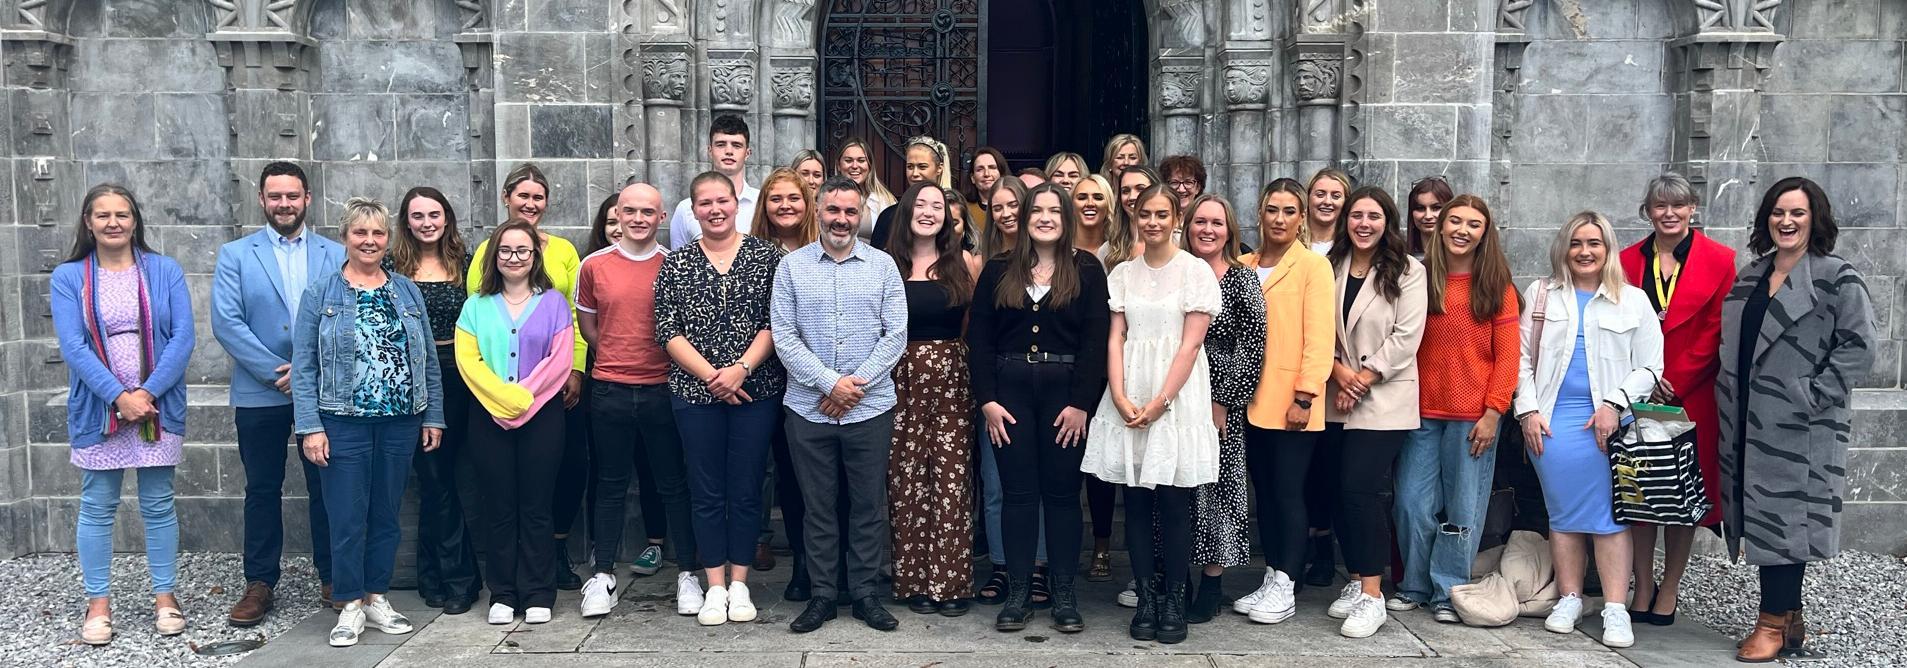 Year four Mental Health Student Nurses celebrate completion